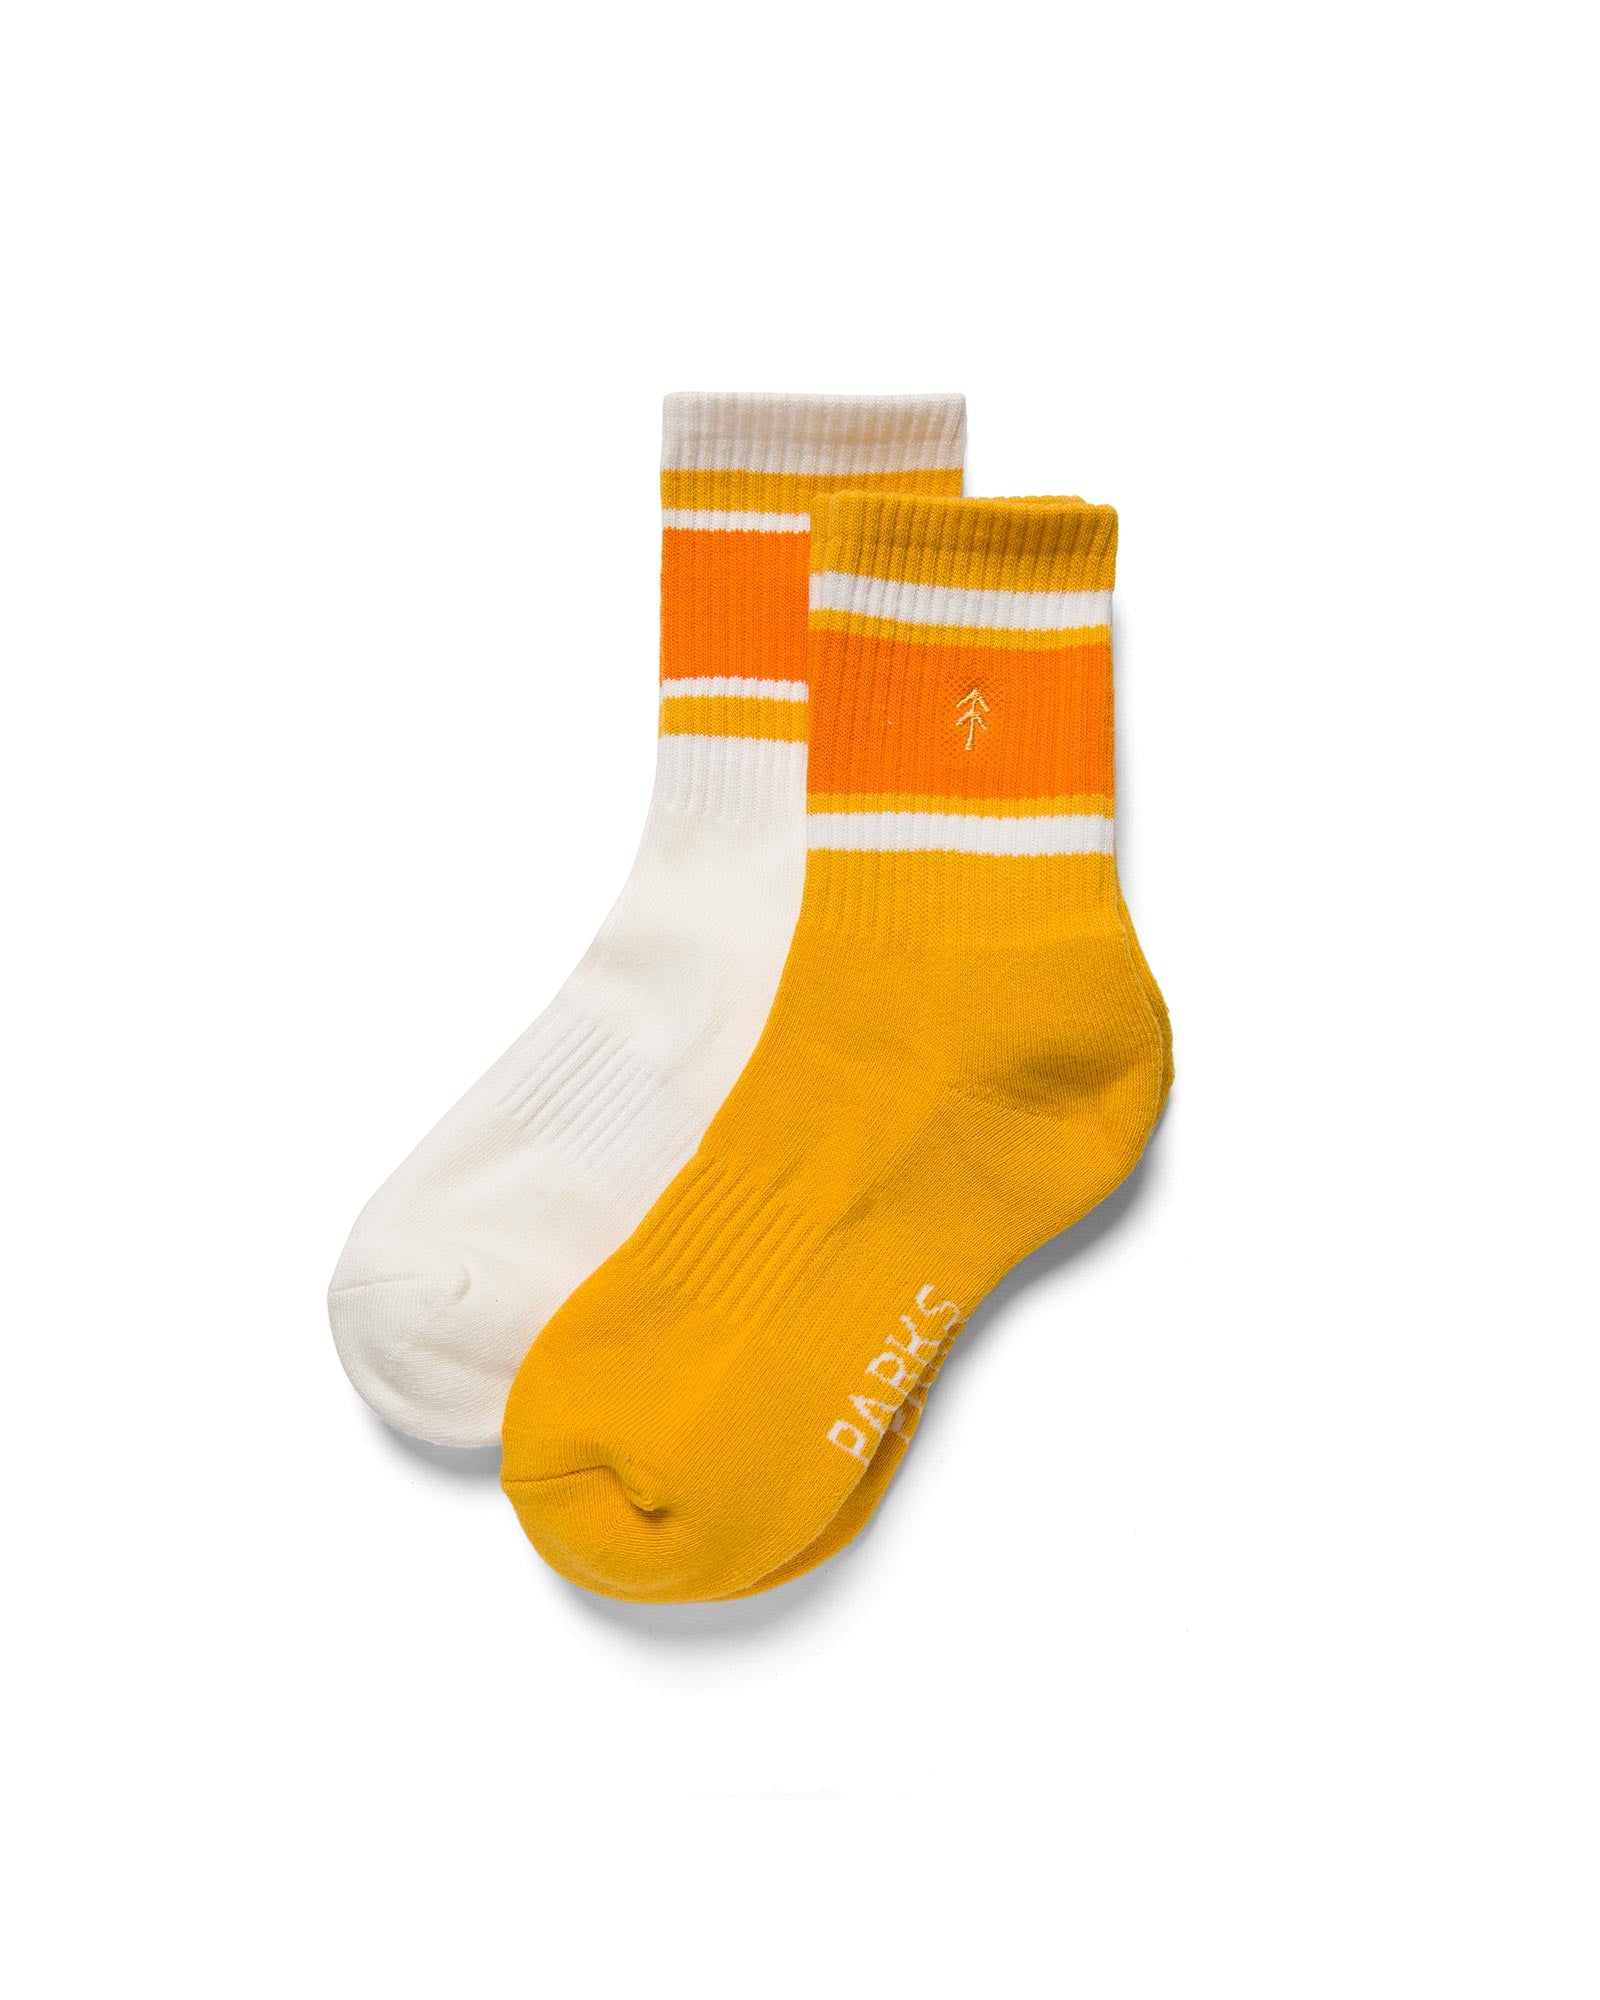 Shop Trail Crew Tube Socks 2 pack Inspired By National Parks